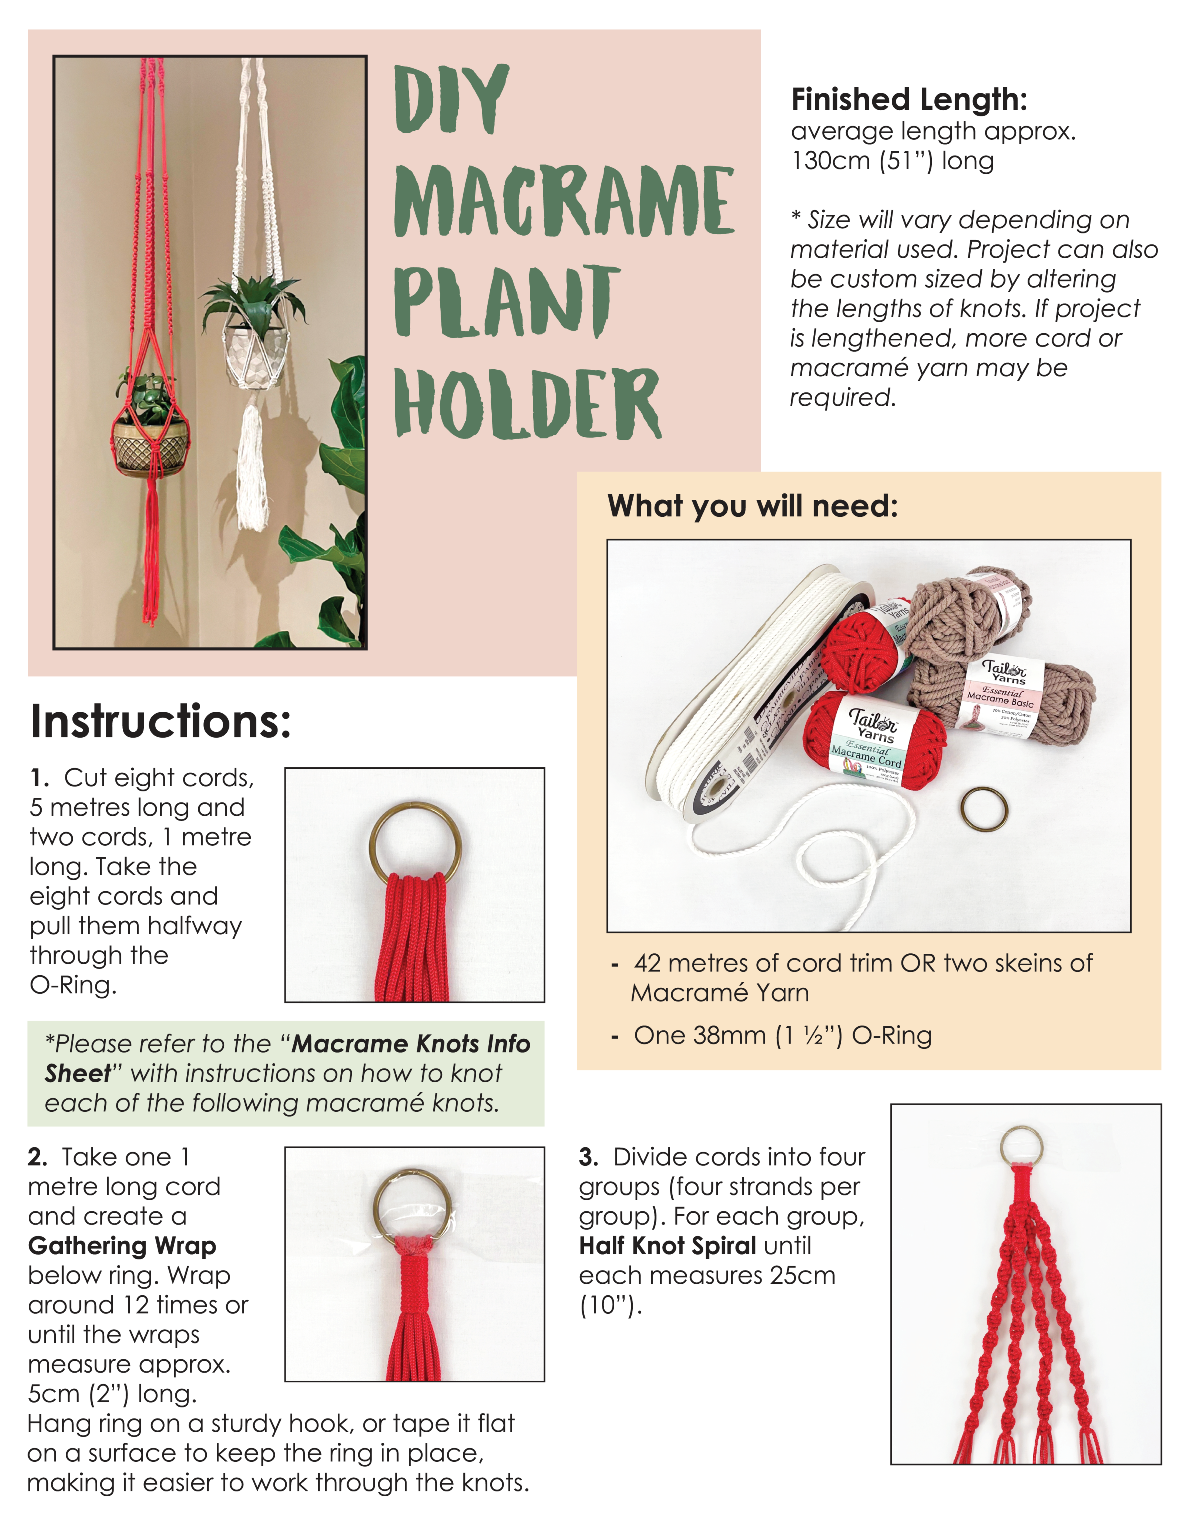 Steps to create your DIY macrame plant holders